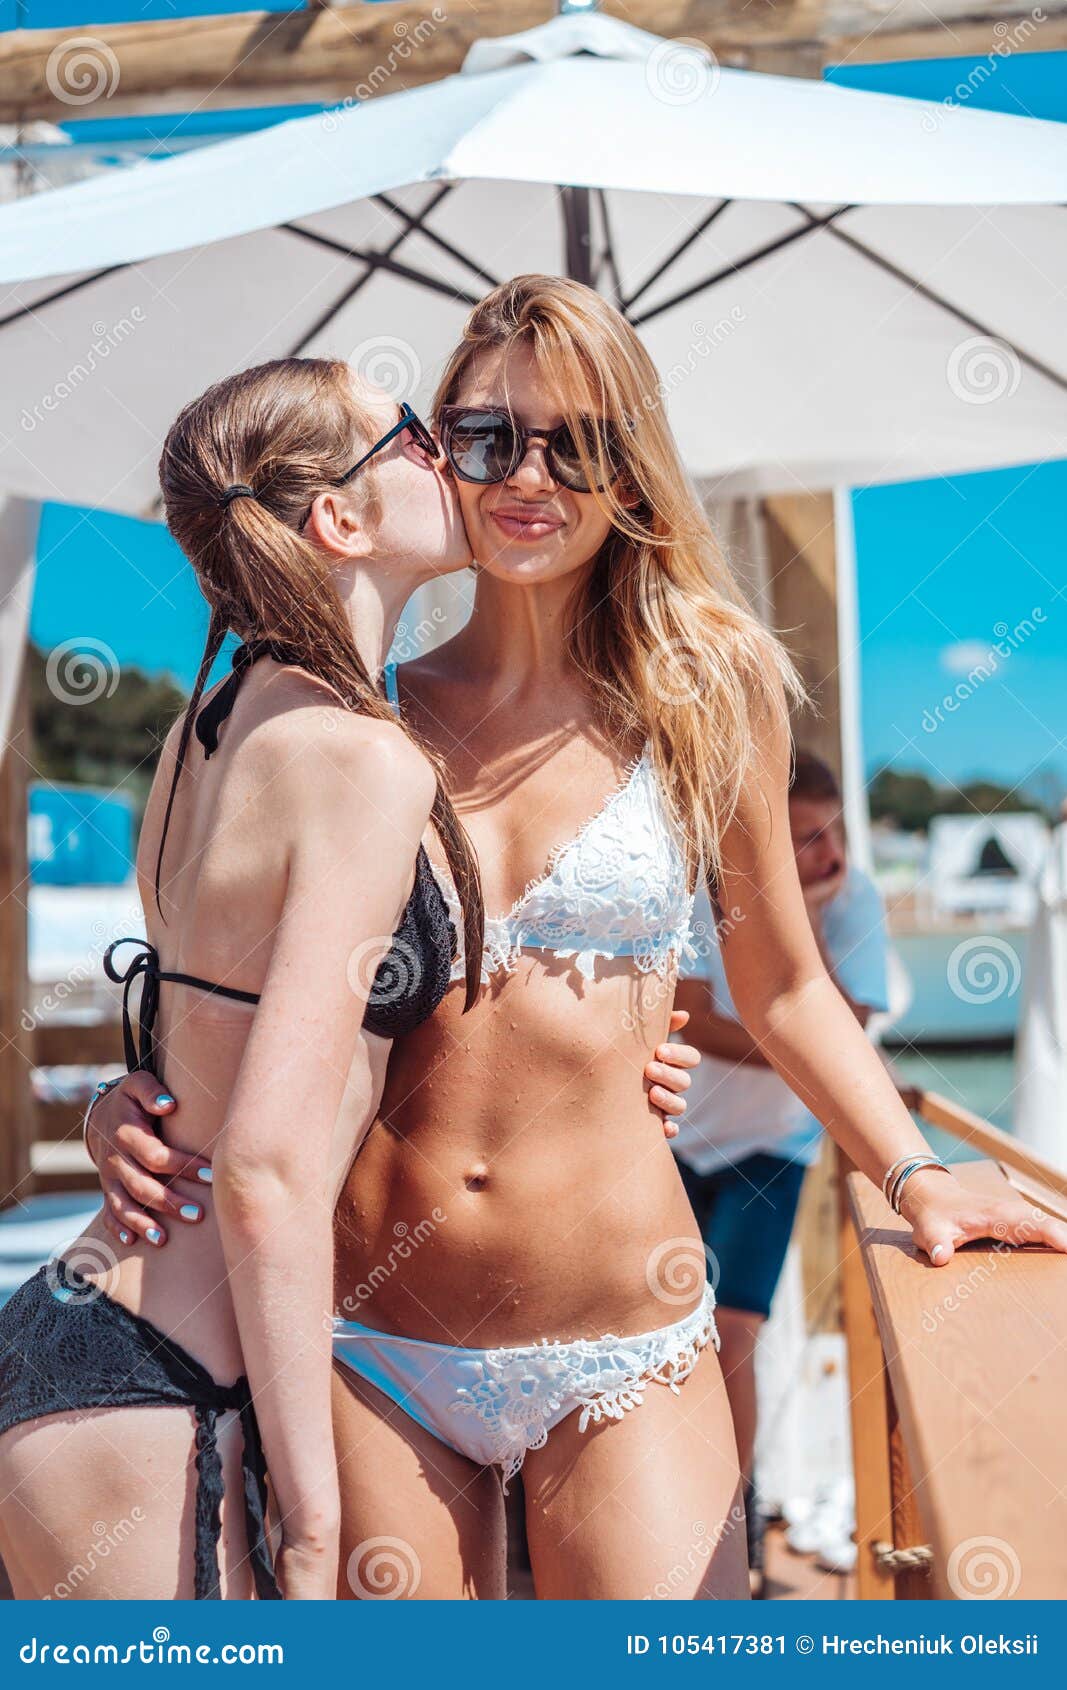 Mom and daughter swimming togther in bikinis 1 684 Mother Daughter Bikini Photos Free Royalty Free Stock Photos From Dreamstime